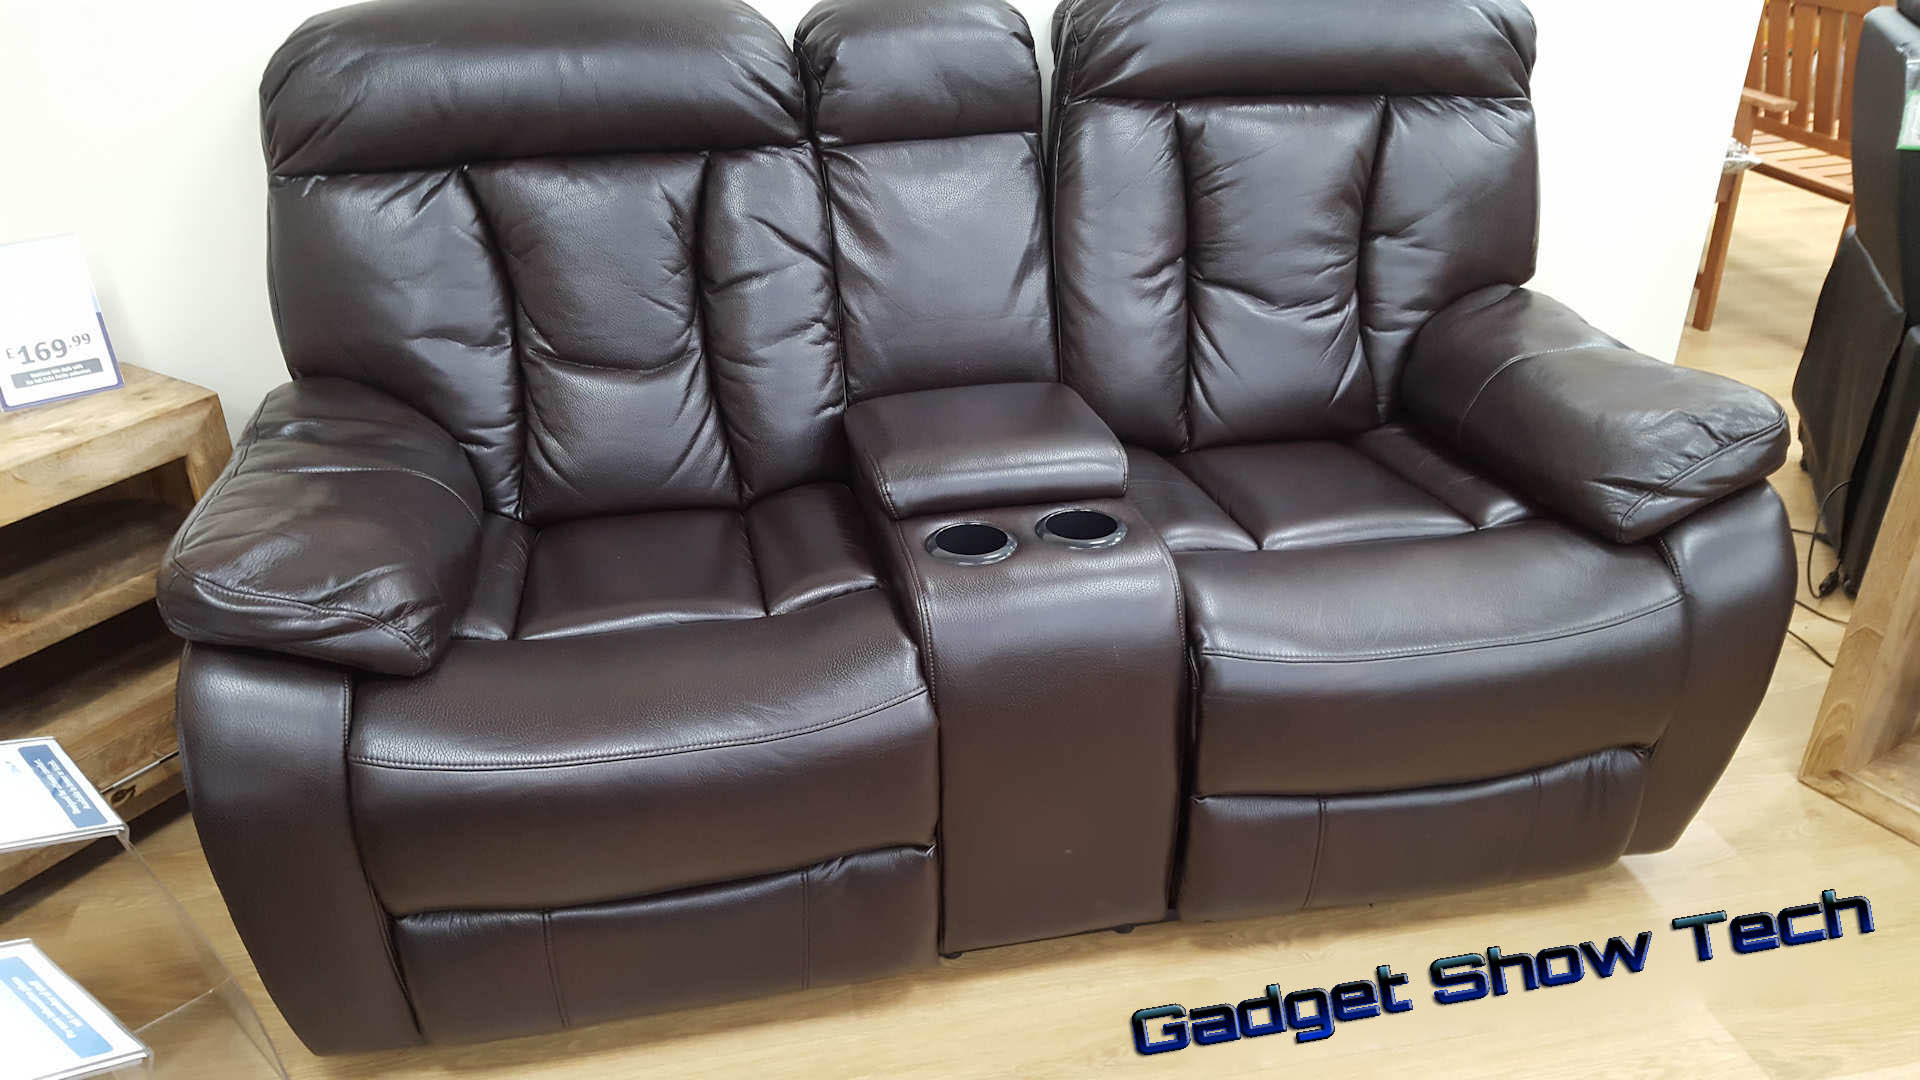 Two Seater Console Recliner sofa